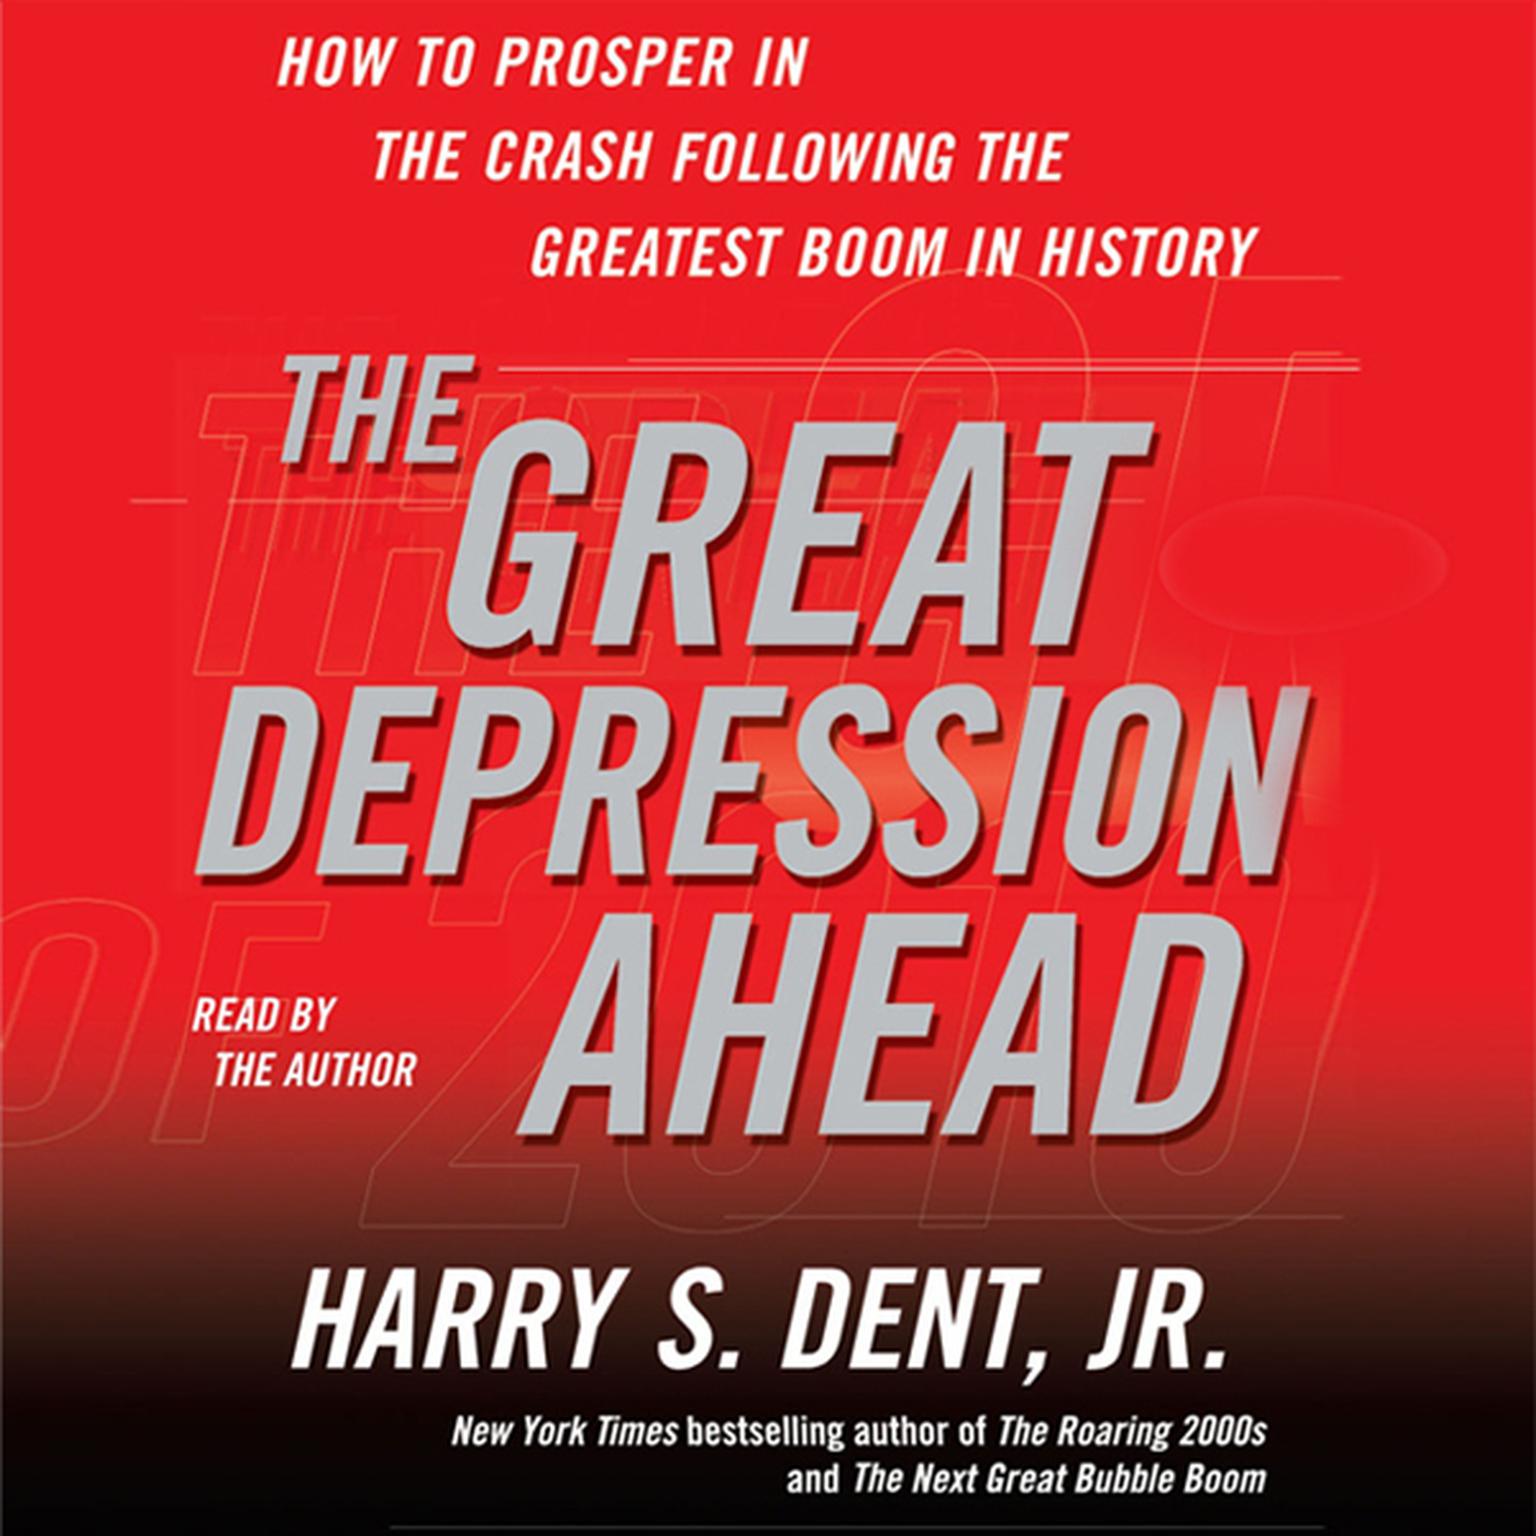 The Great Depression Ahead (Abridged): How to Prosper in the Crash That Follows the Greatest Boom in History Audiobook, by Harry S. Dent